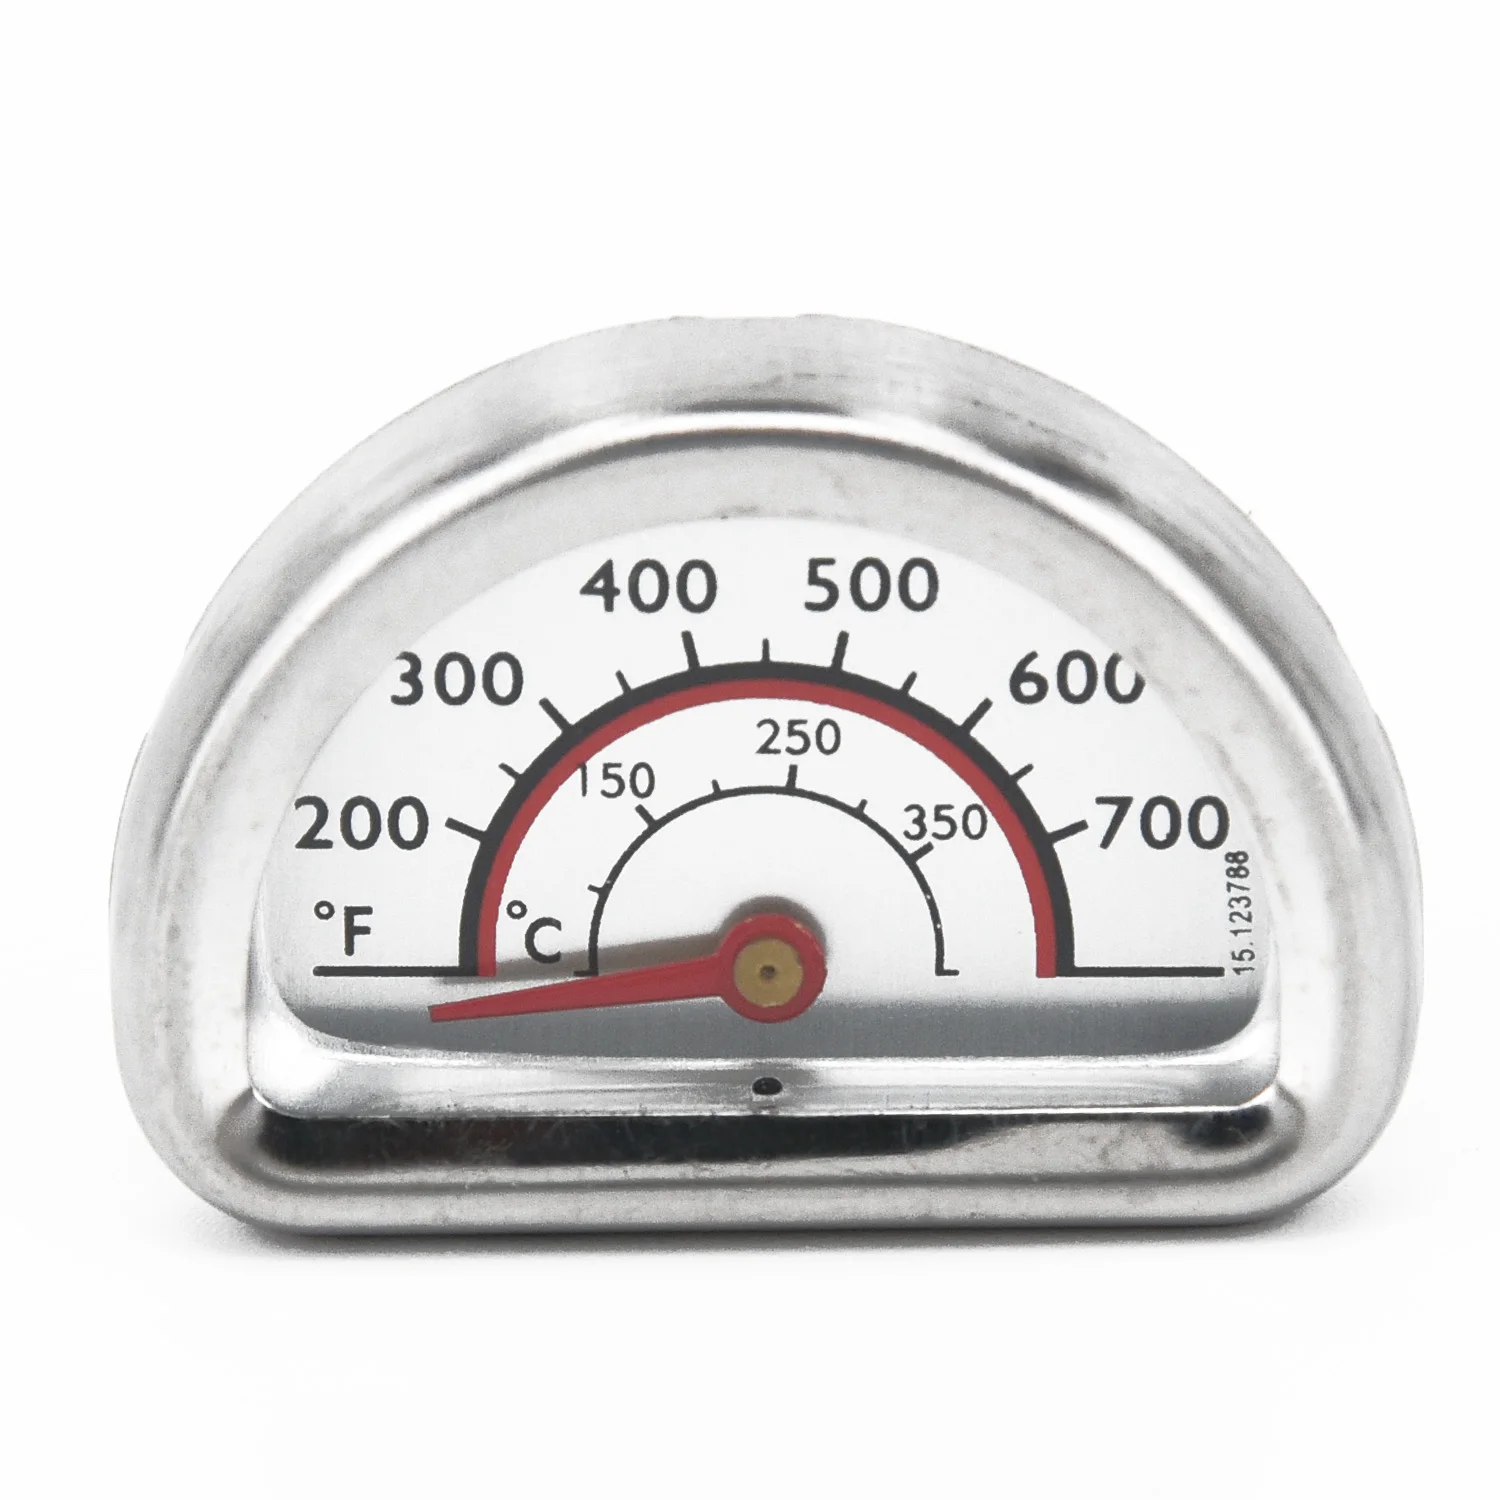 Char-Broil Round Grill Thermometer